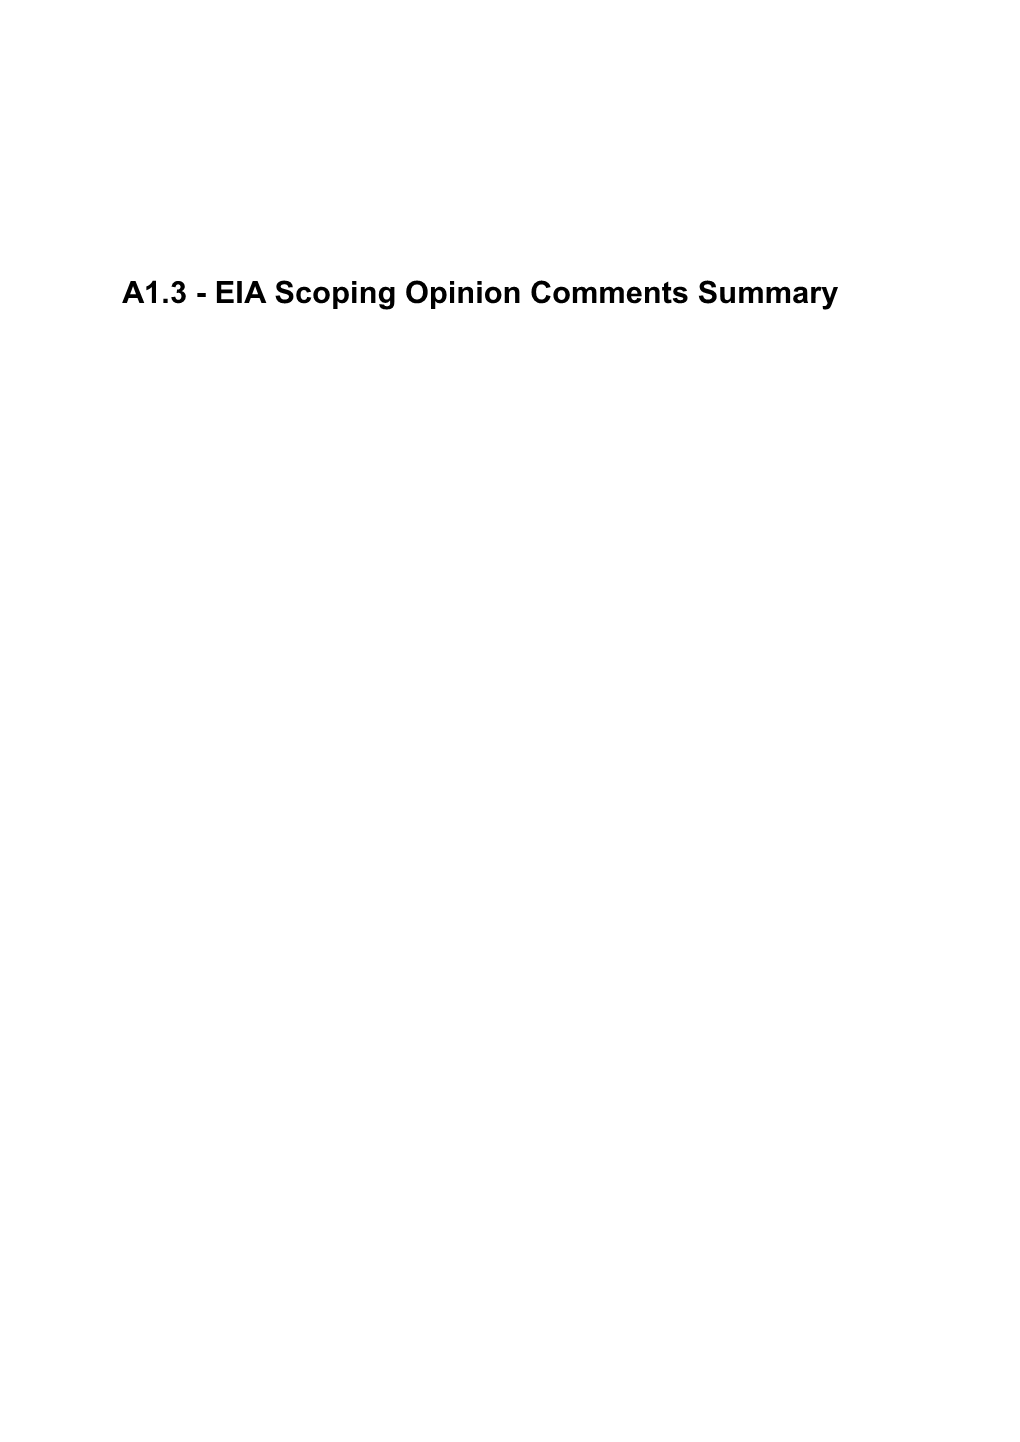 EIA Scoping Opinion Comments Summary